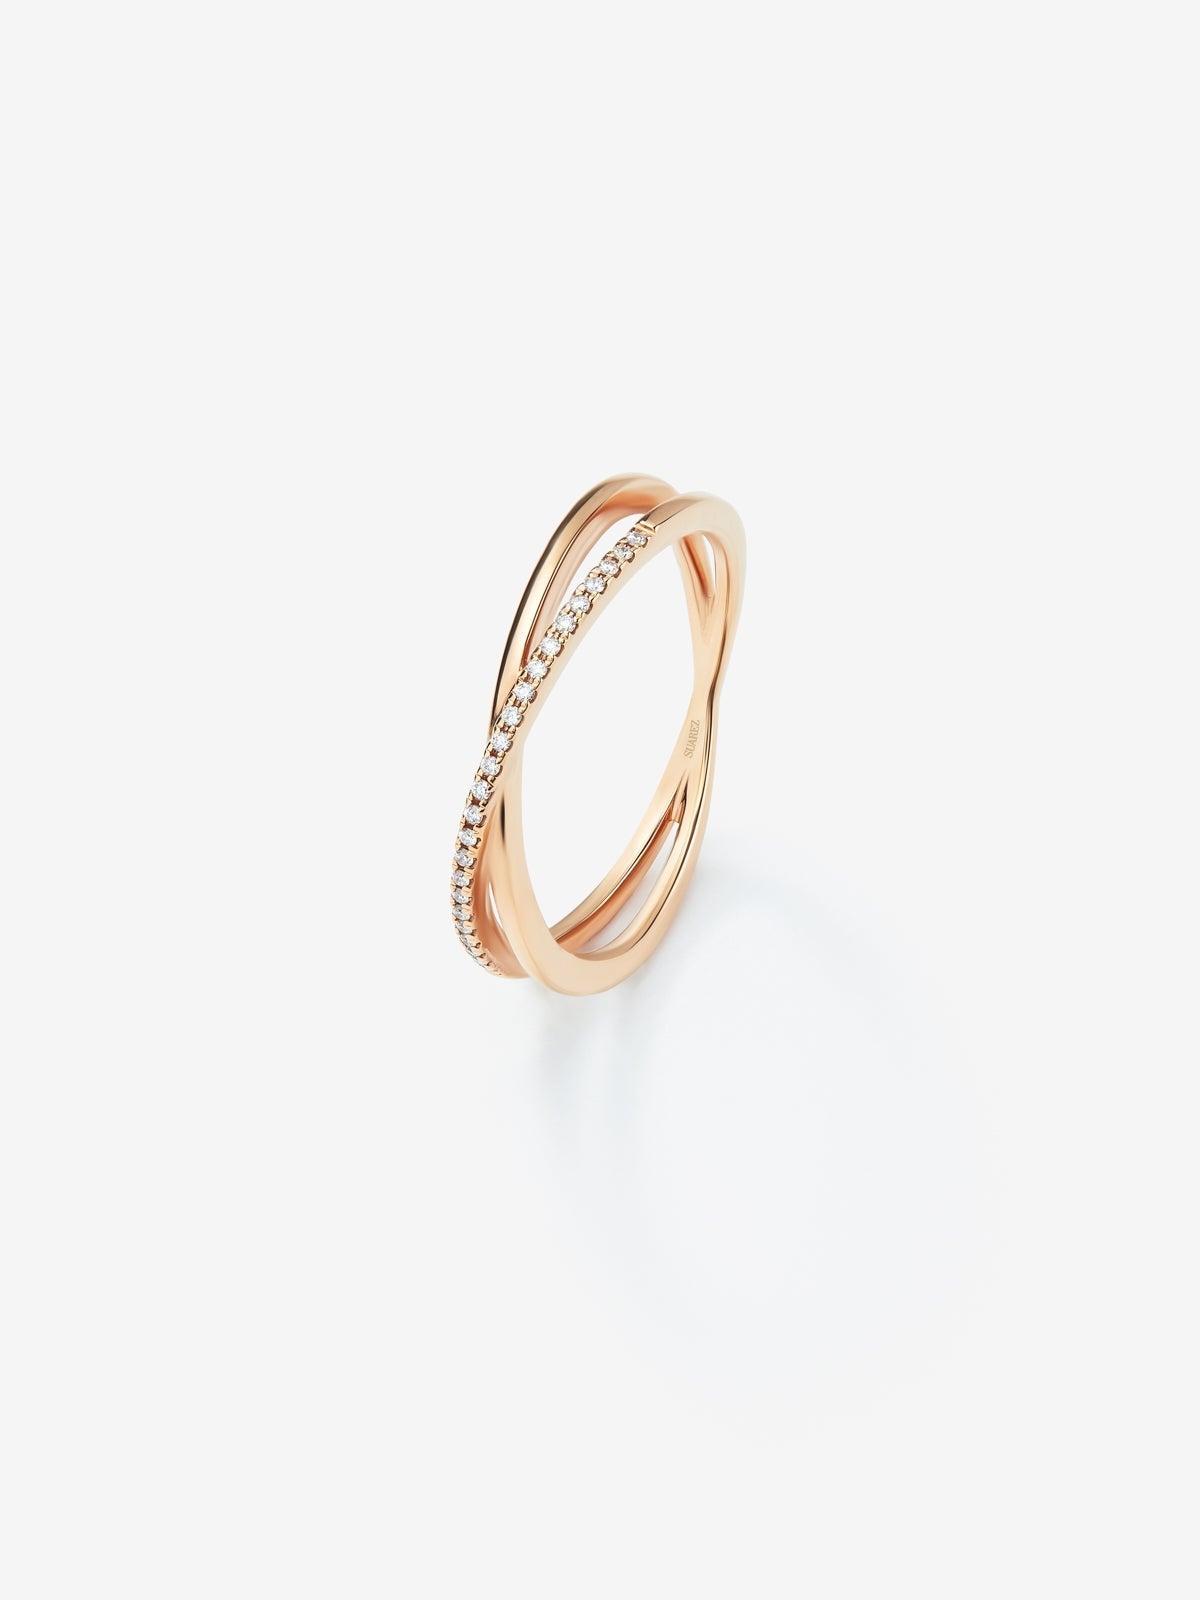 18K rose gold cross ring with 24 brilliant-cut white diamonds with a total of 0.07 cts